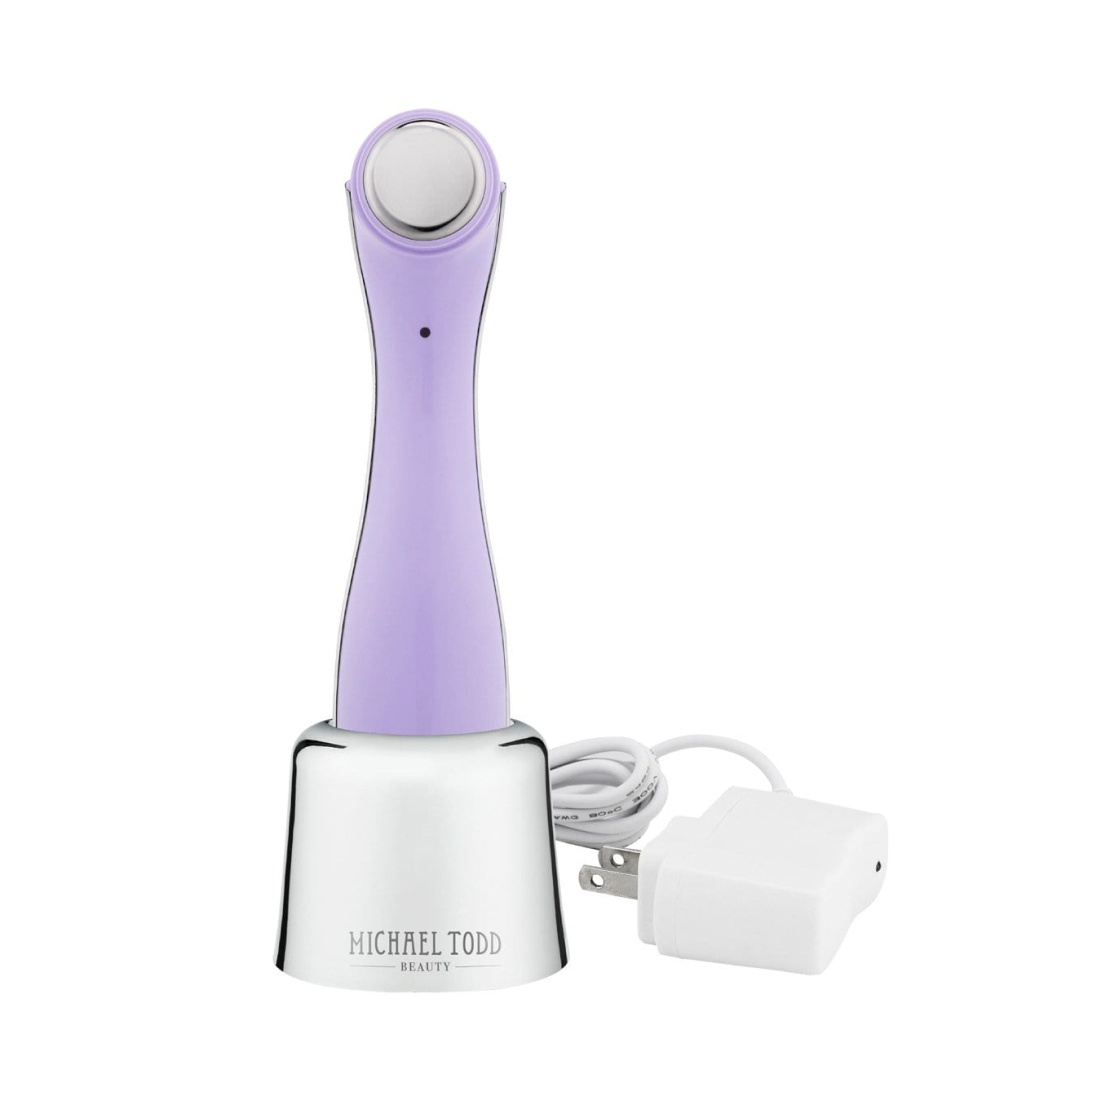 A purple Eternal Youth device by Michael Todd Beauty with a white cord is suitable for applying serum or cream.